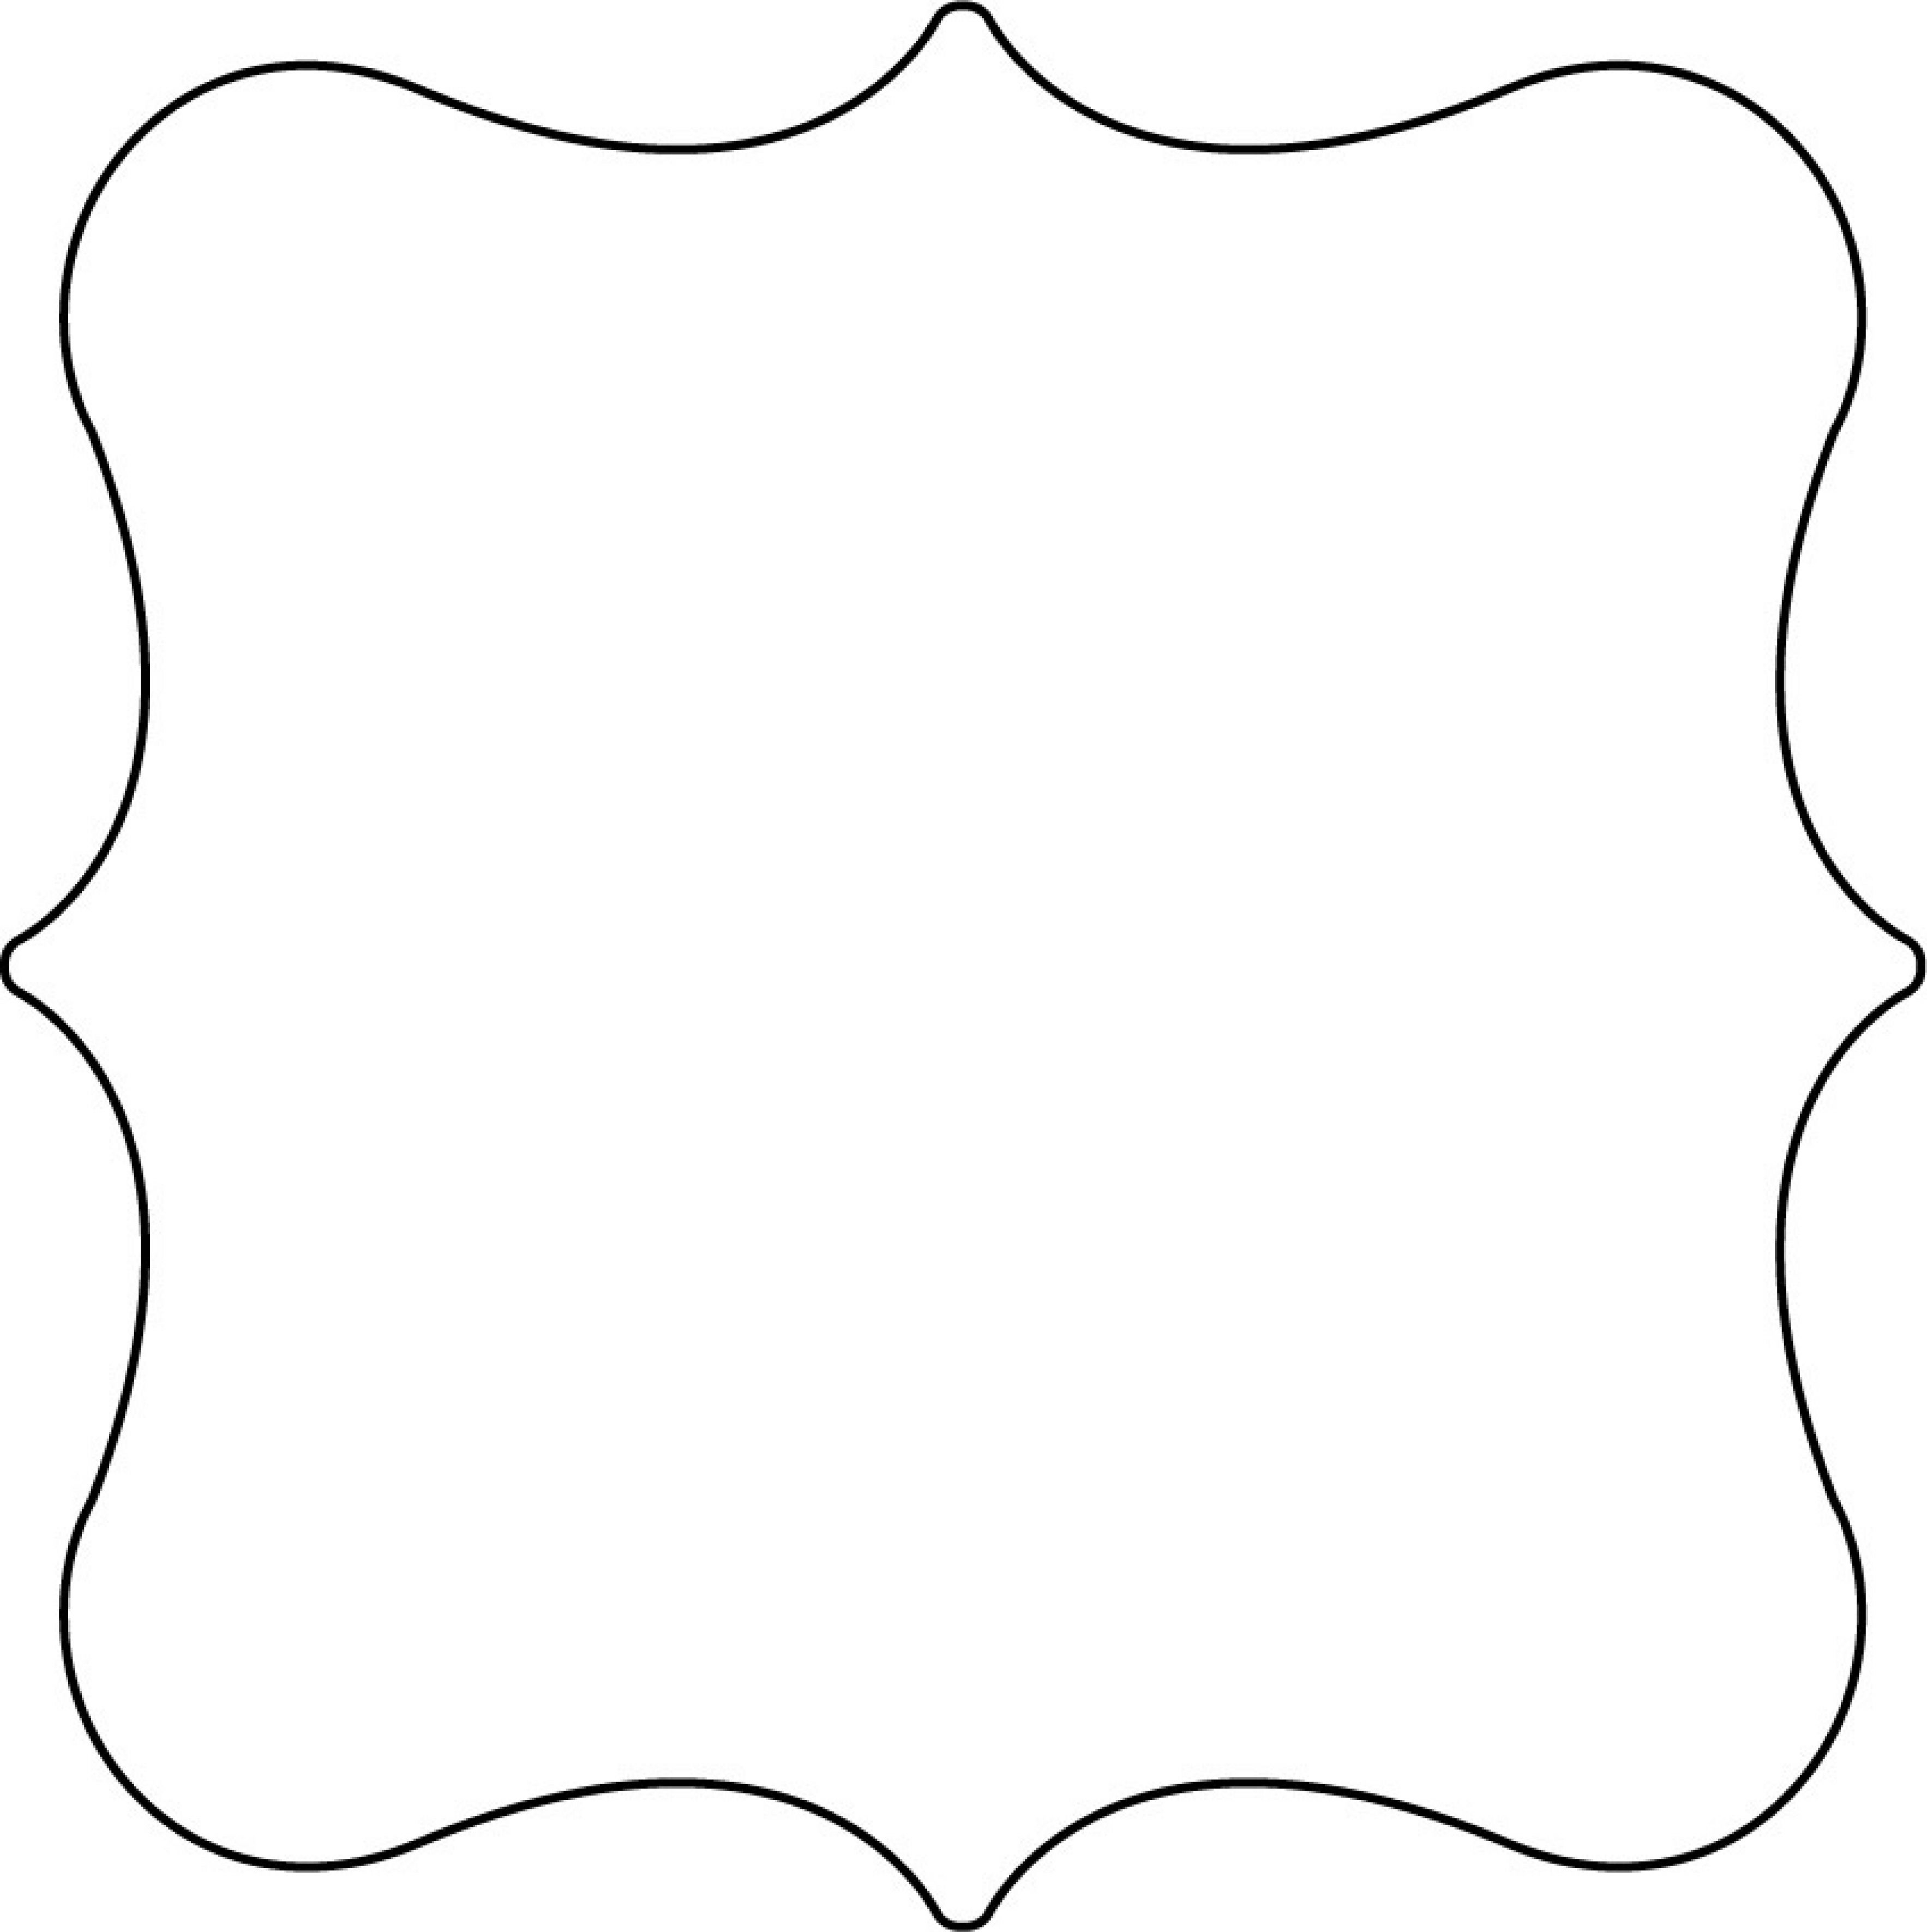 Cake Templates | Clear Scraps Xl Shapes | Cake Decorating - Free Shape Templates Printable